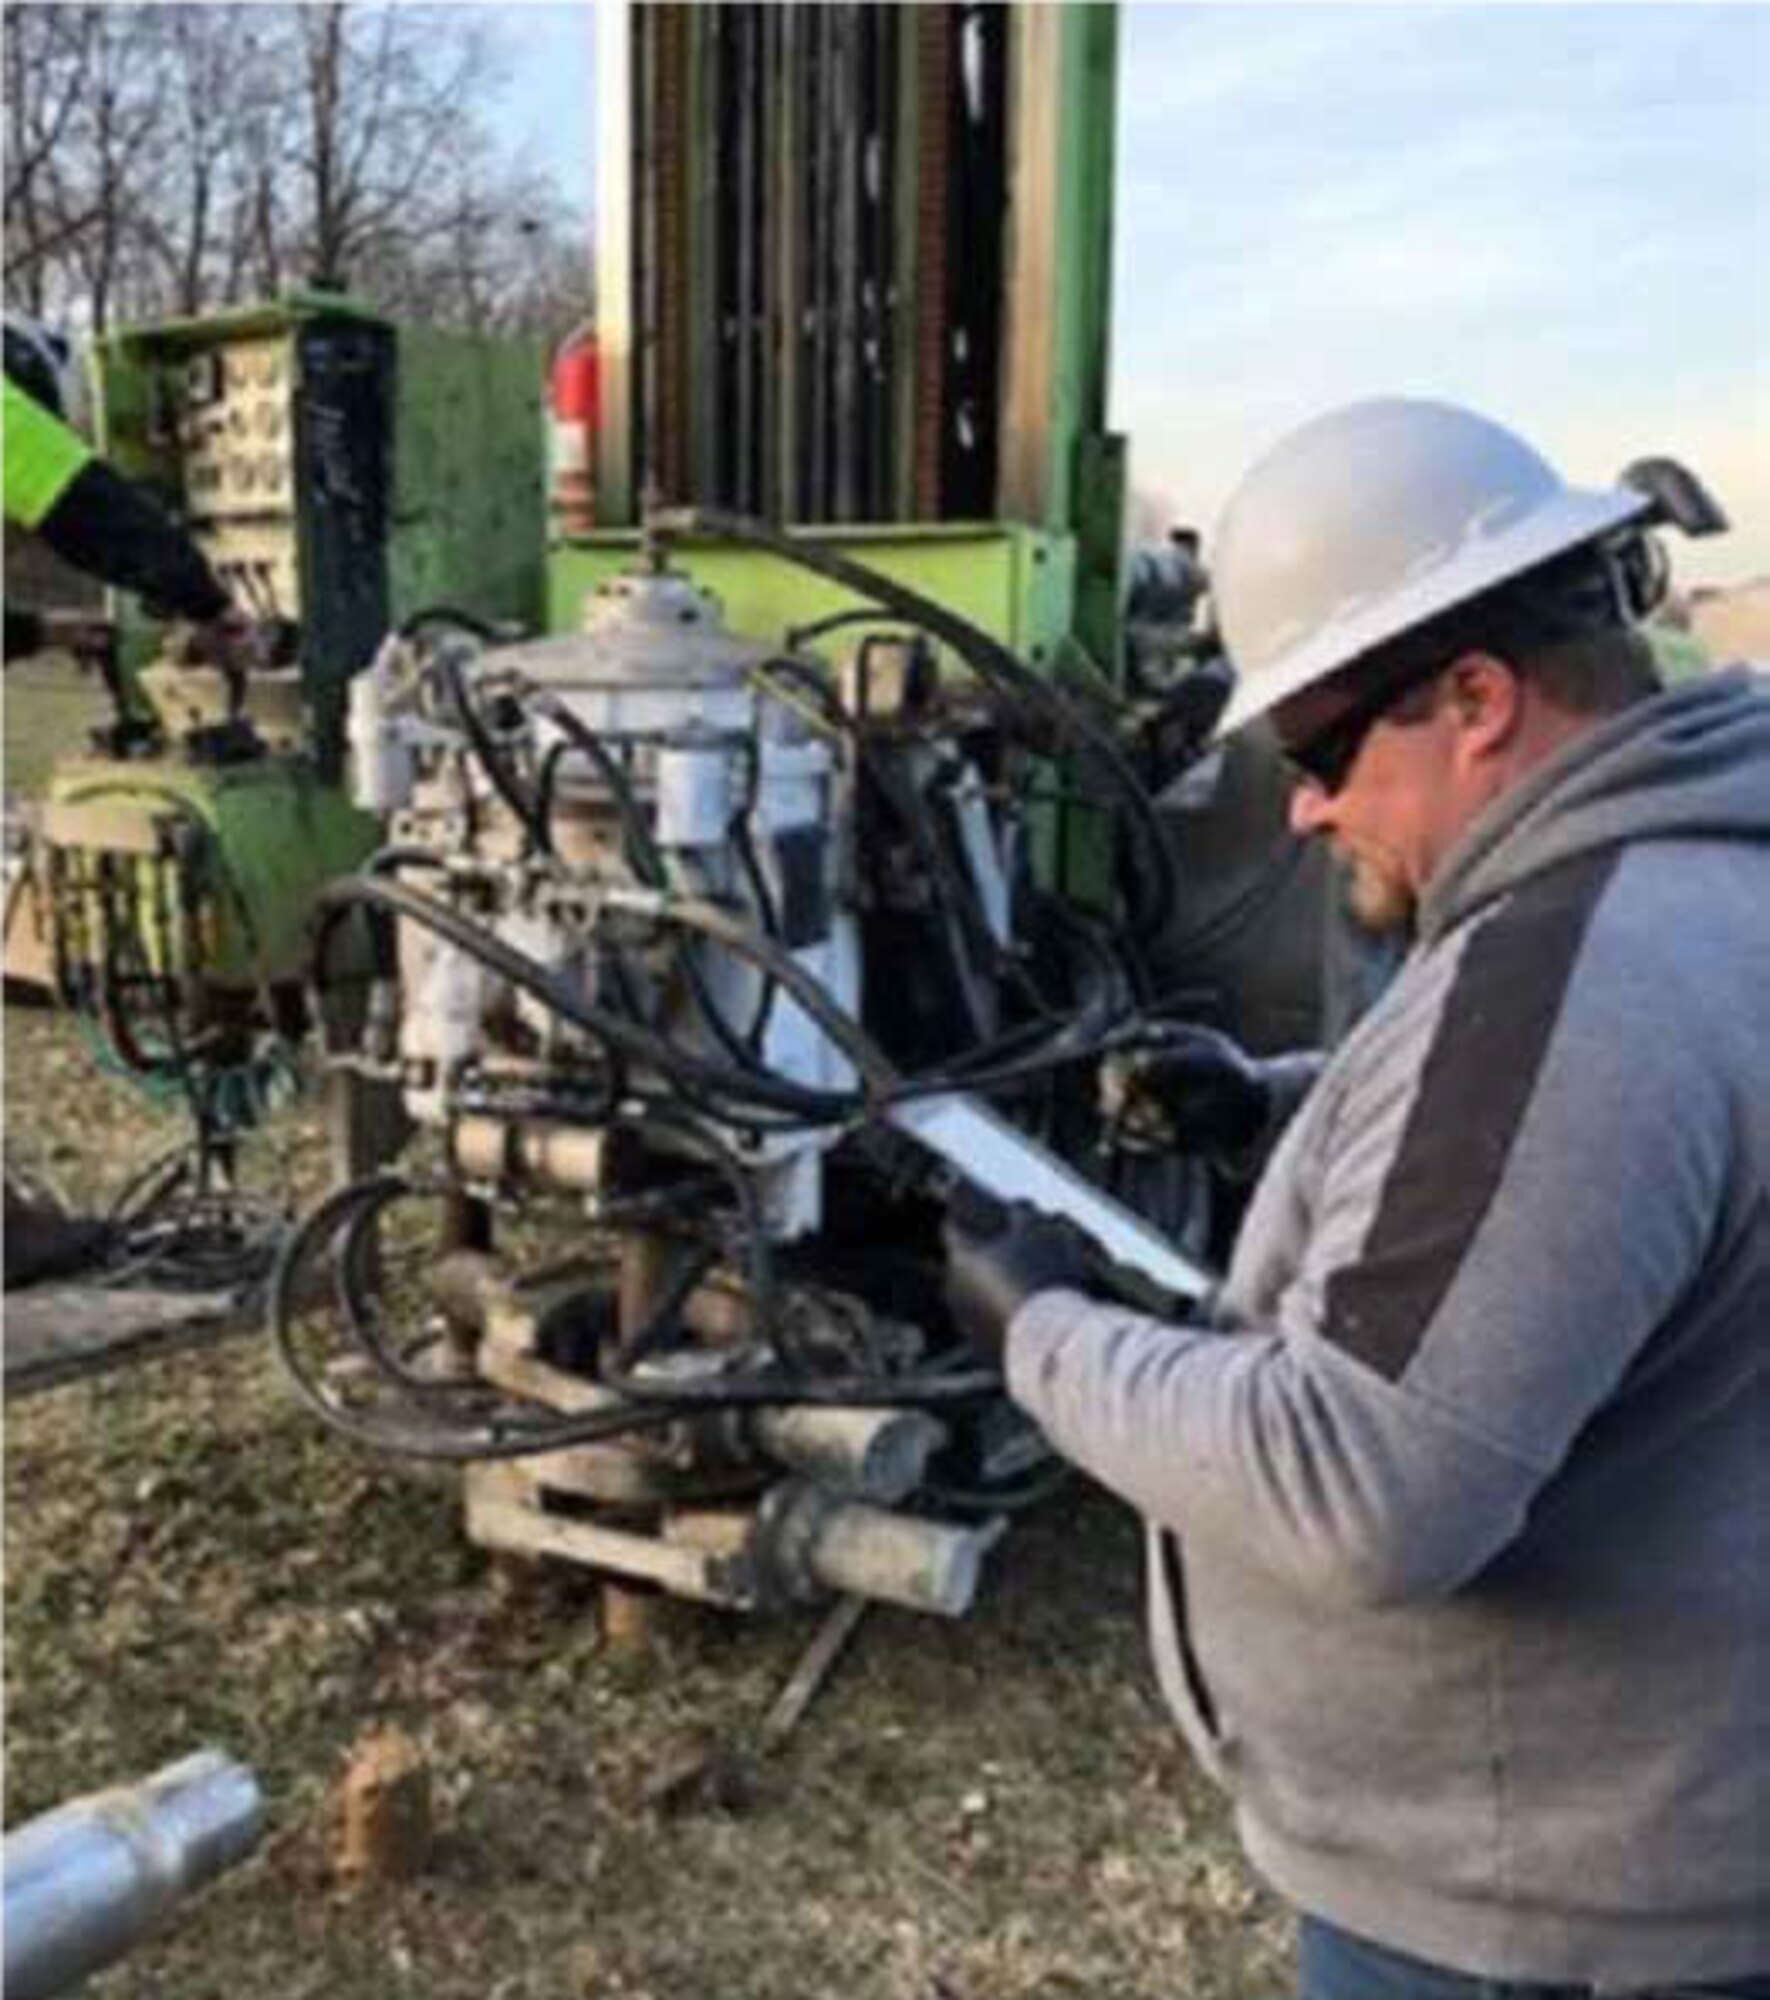 Contractors dug wells at various locations around Shepherd Field, Martinsburg, W.Va., in September 2019 as part of an Expanded Site Inspection for Perfluorooctanoic Acid (PFOA) and Perfluorooctane Sulfonate (PFOS). The findings were outlined in a report published in November 2020.